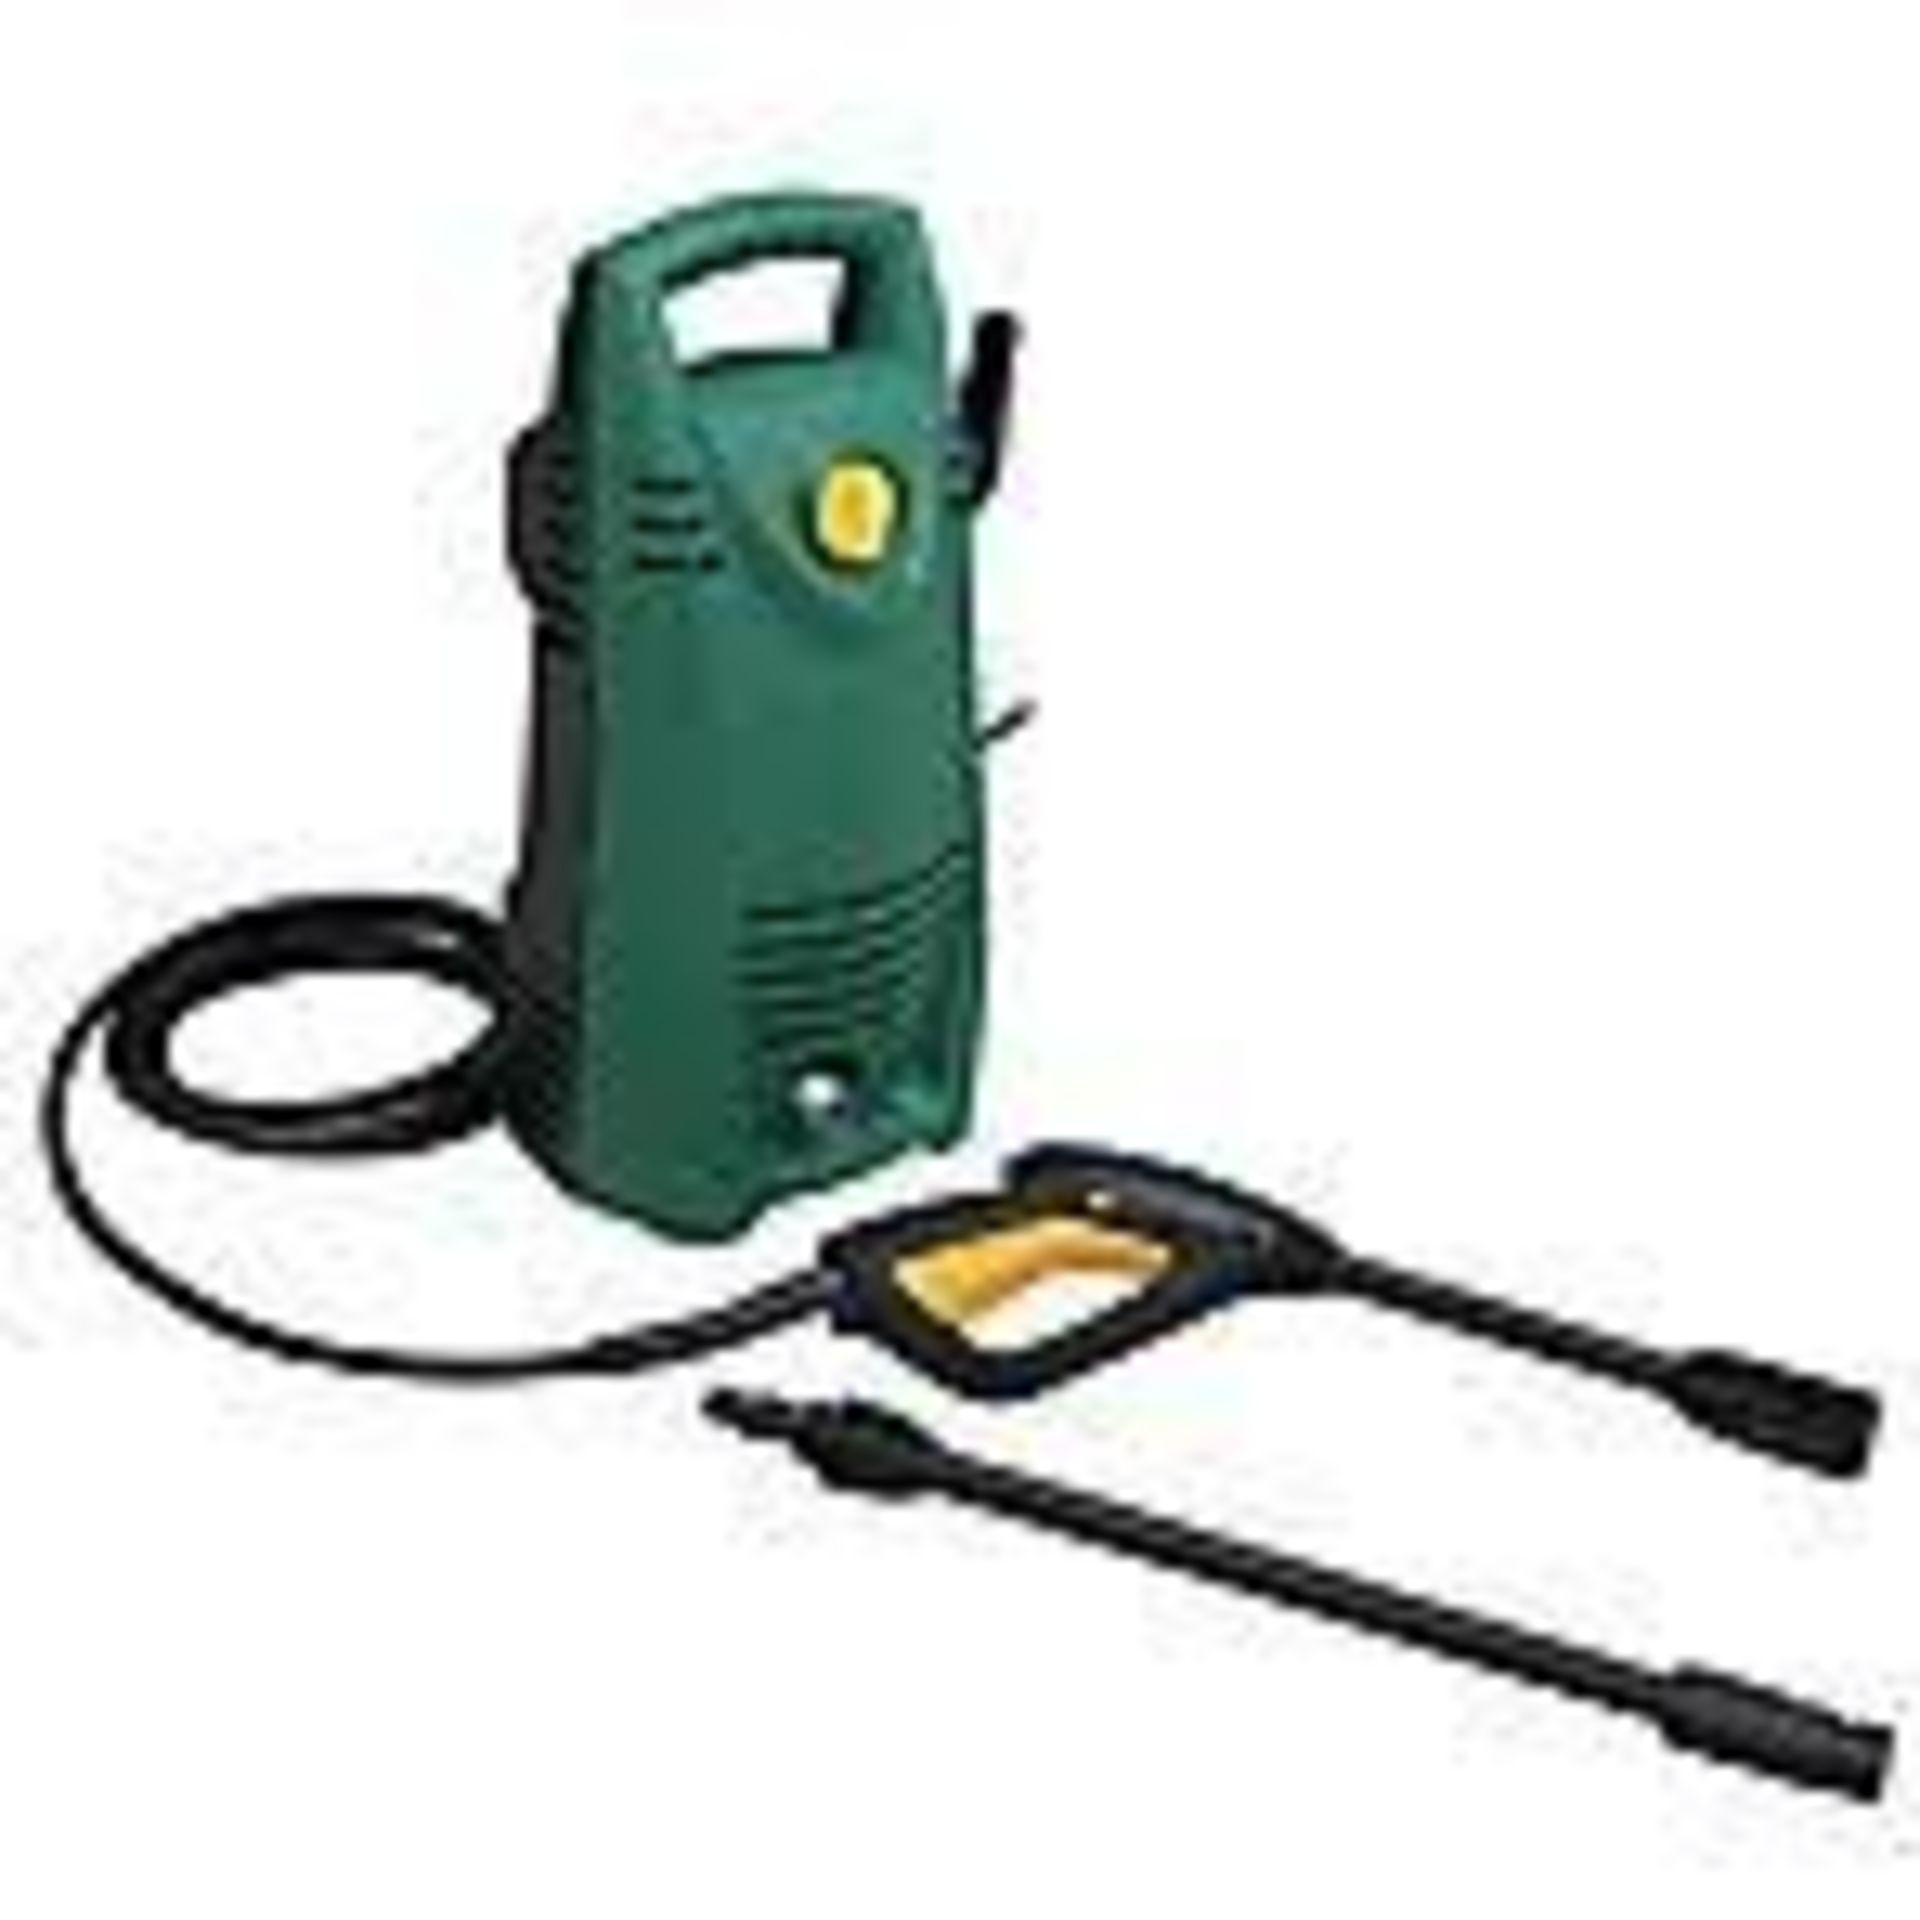 Auto-stop Corded Pressure washer 1.4kW FPHPC100. -R14.6. A great light weight pressure washer